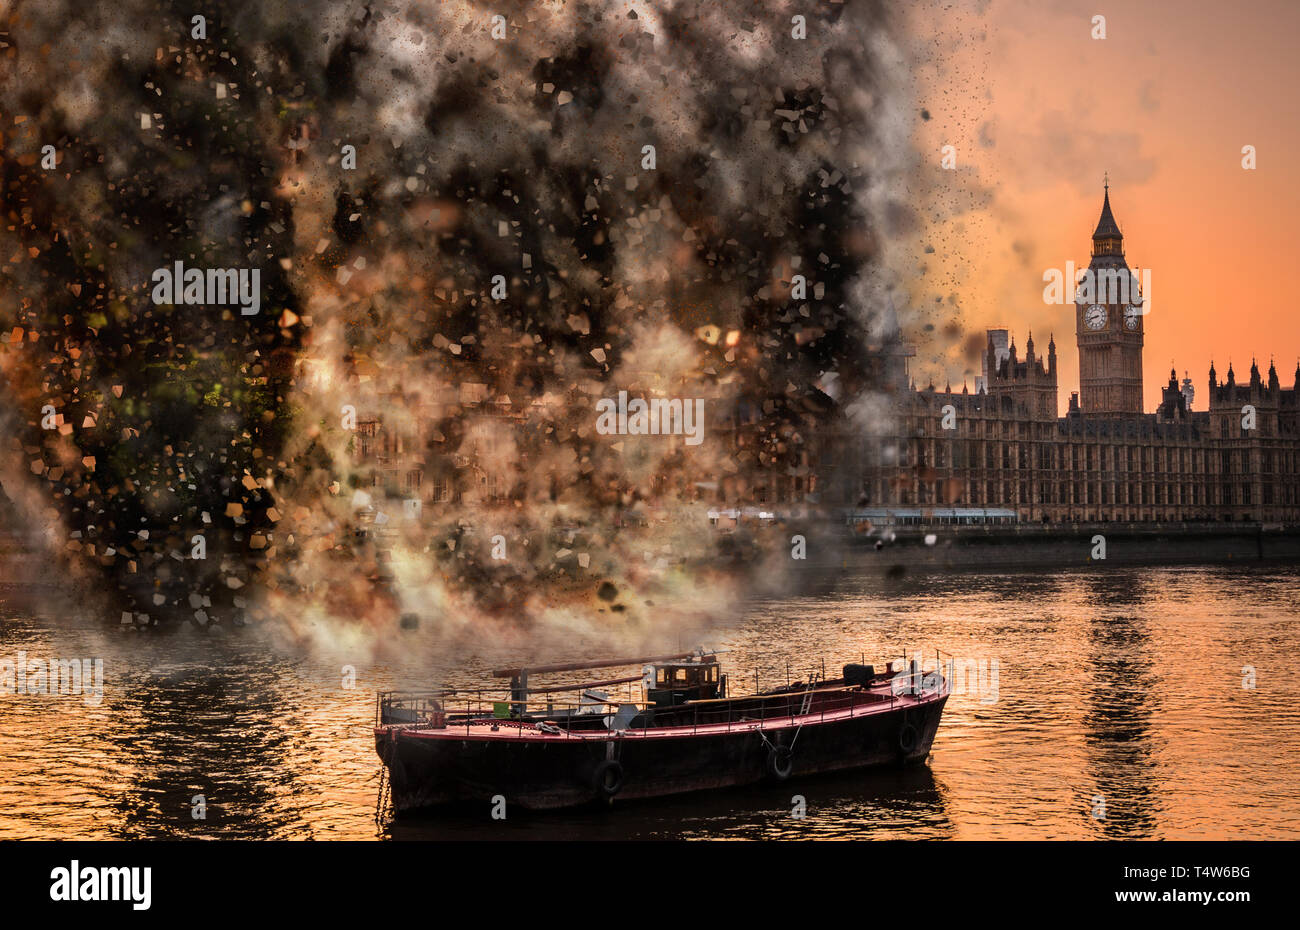 Apocalypse End of Times digital concept of explosion at Houses of Parliament, Westminster, London, UK Stock Photo